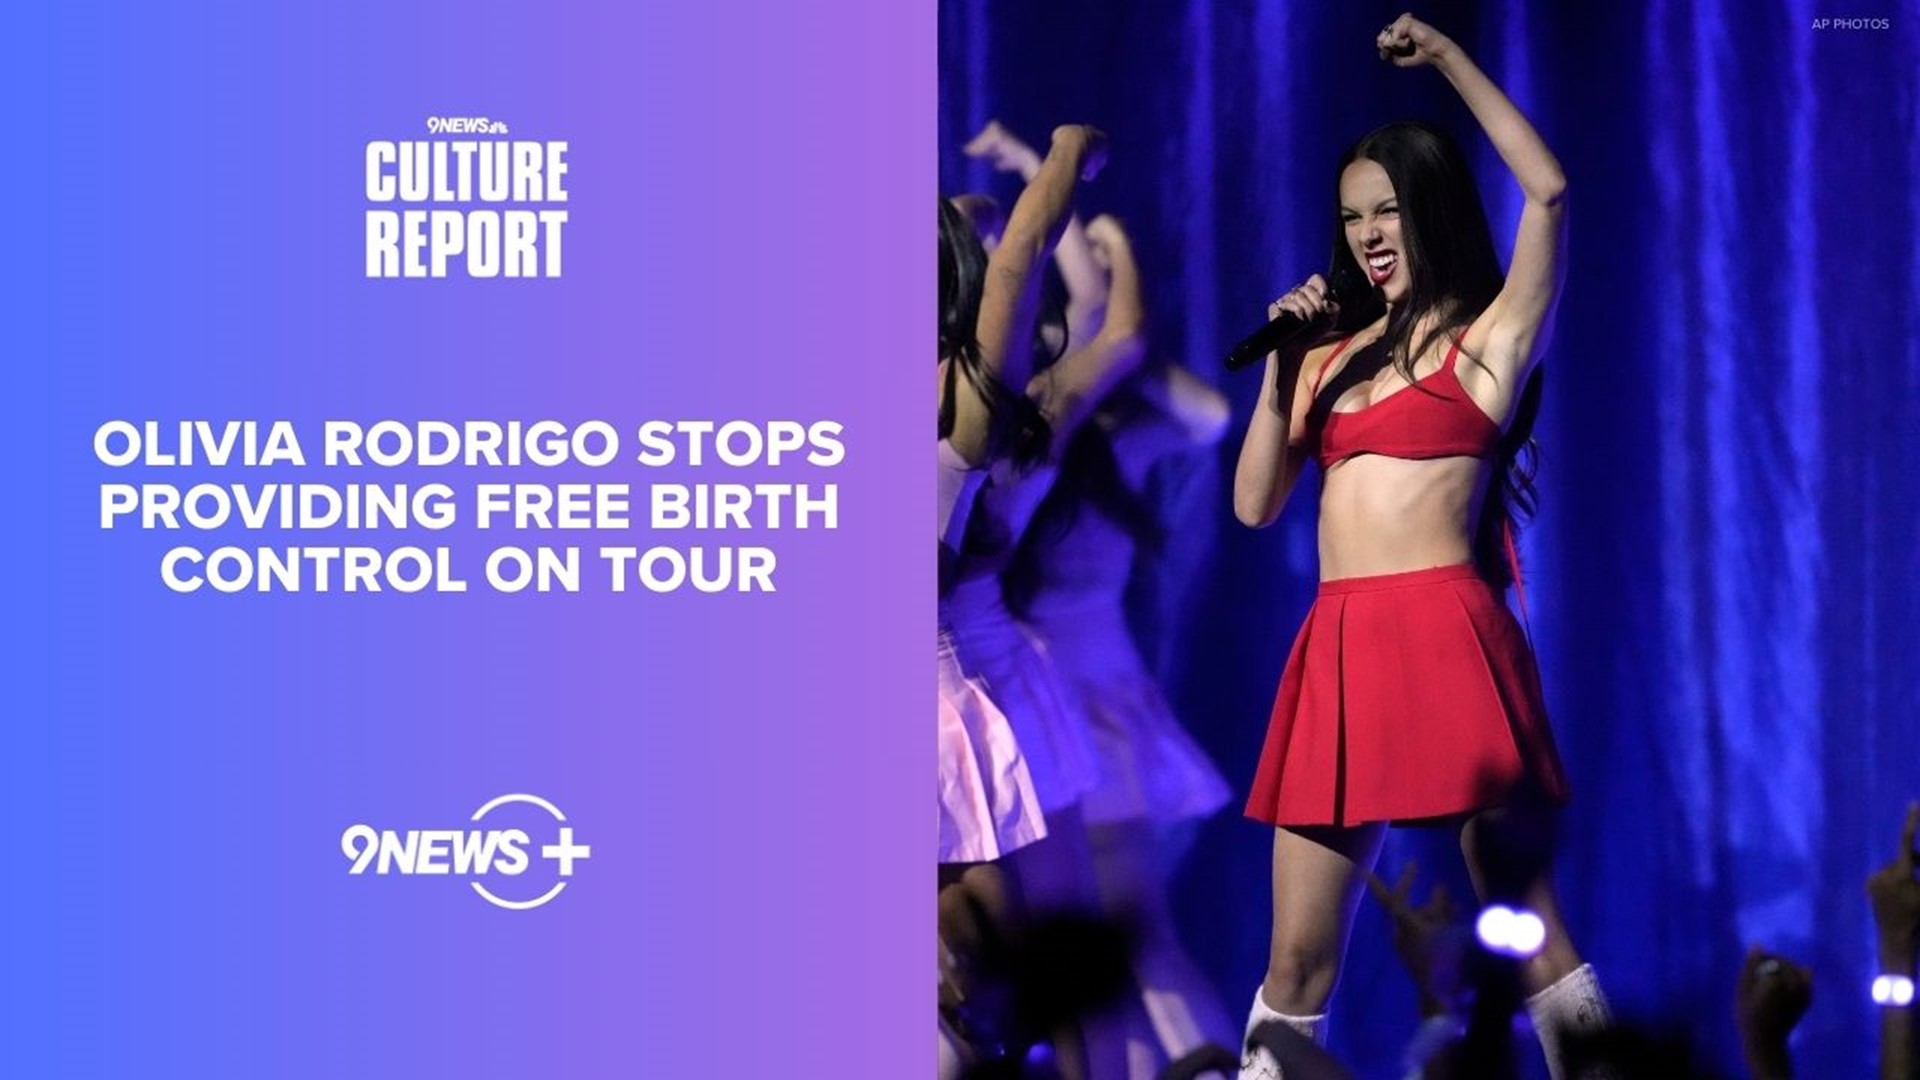 This week we chat about why Olivia Rodrigo stopped giving out free emergency contraception at her shows. Also a debate on Peso Pluma's ride to worldwide fame.